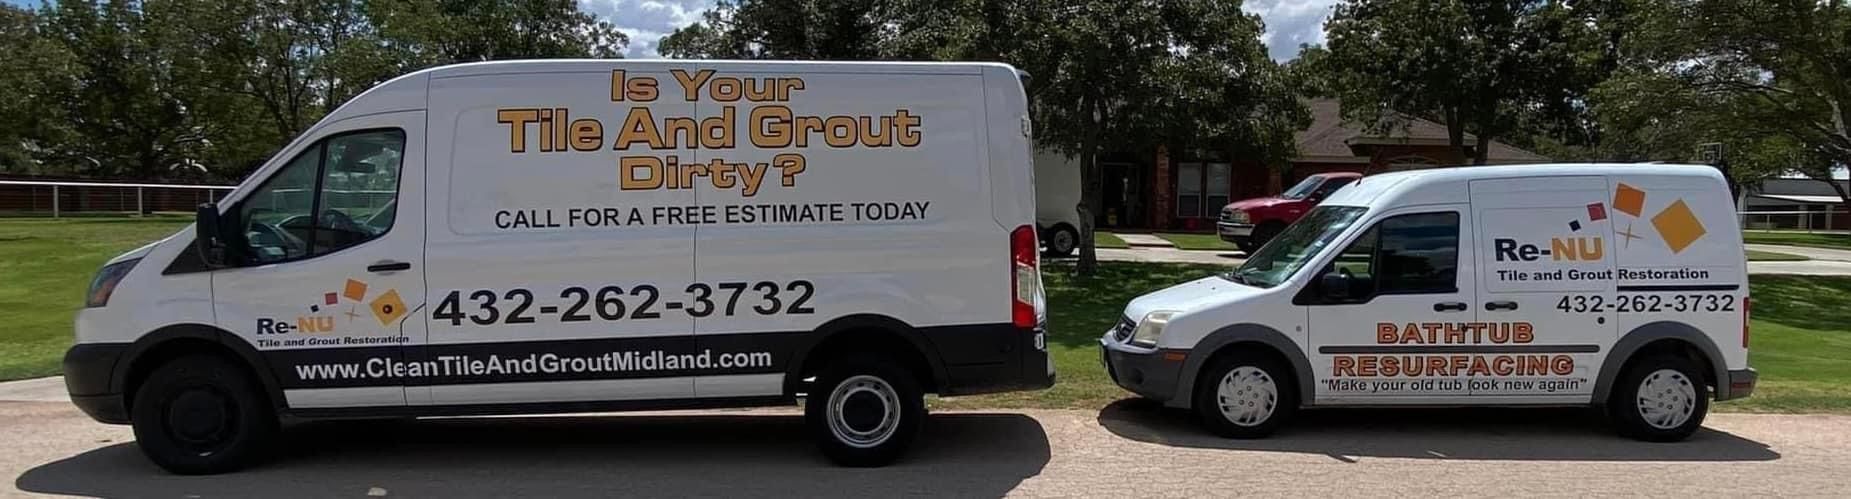 Re-Nu Tile and Grout Restoration Midland Texas. Has tile and grout cleaning vans and bathtub refinishing vans. 